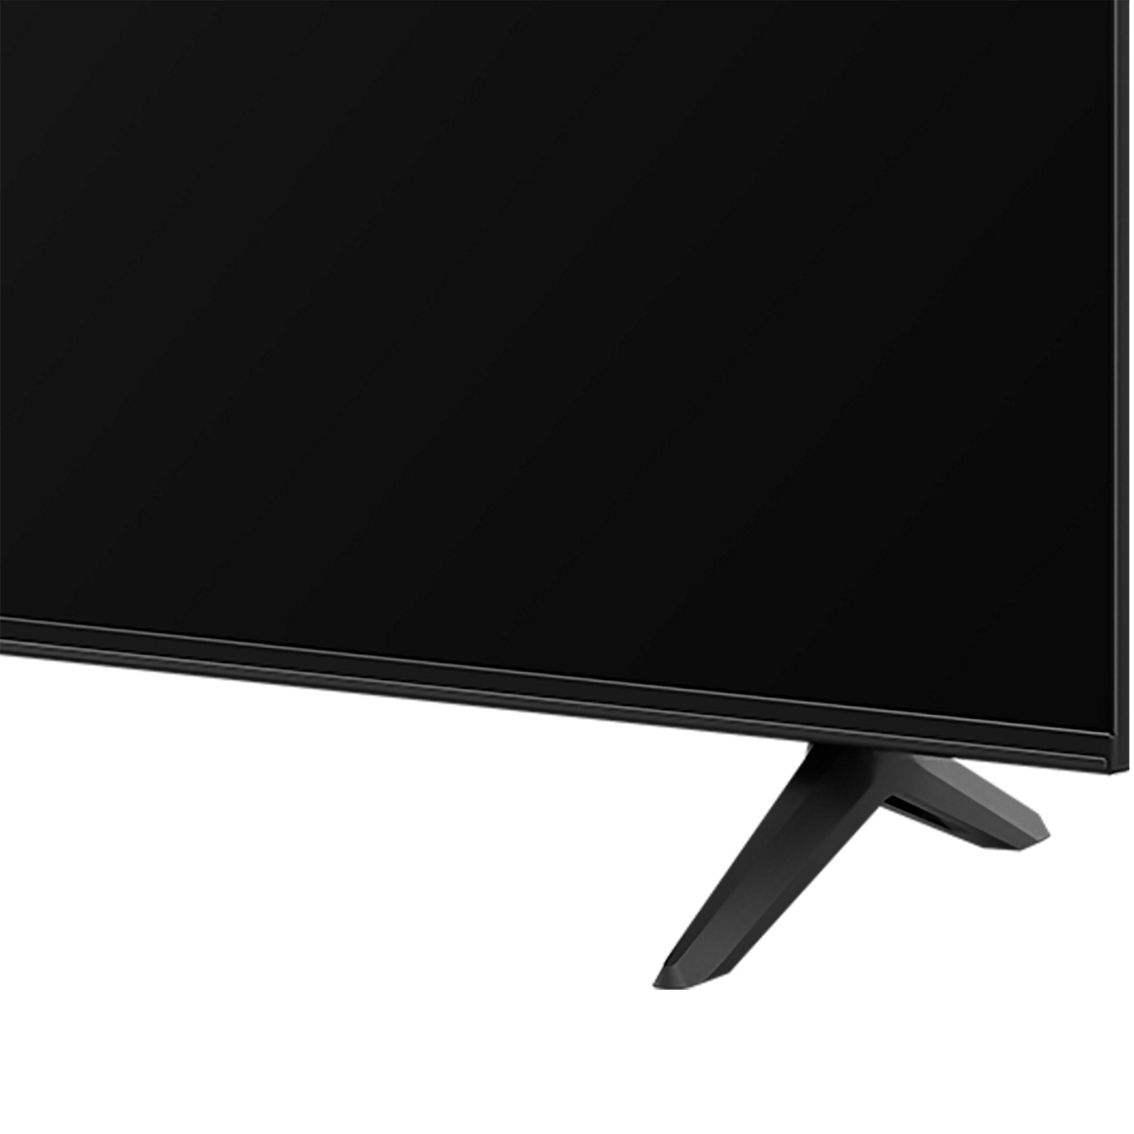 TCL 65 in. S Class 4K UHD HDR LED Smart TV with Google TV 65S450G - Image 9 of 10